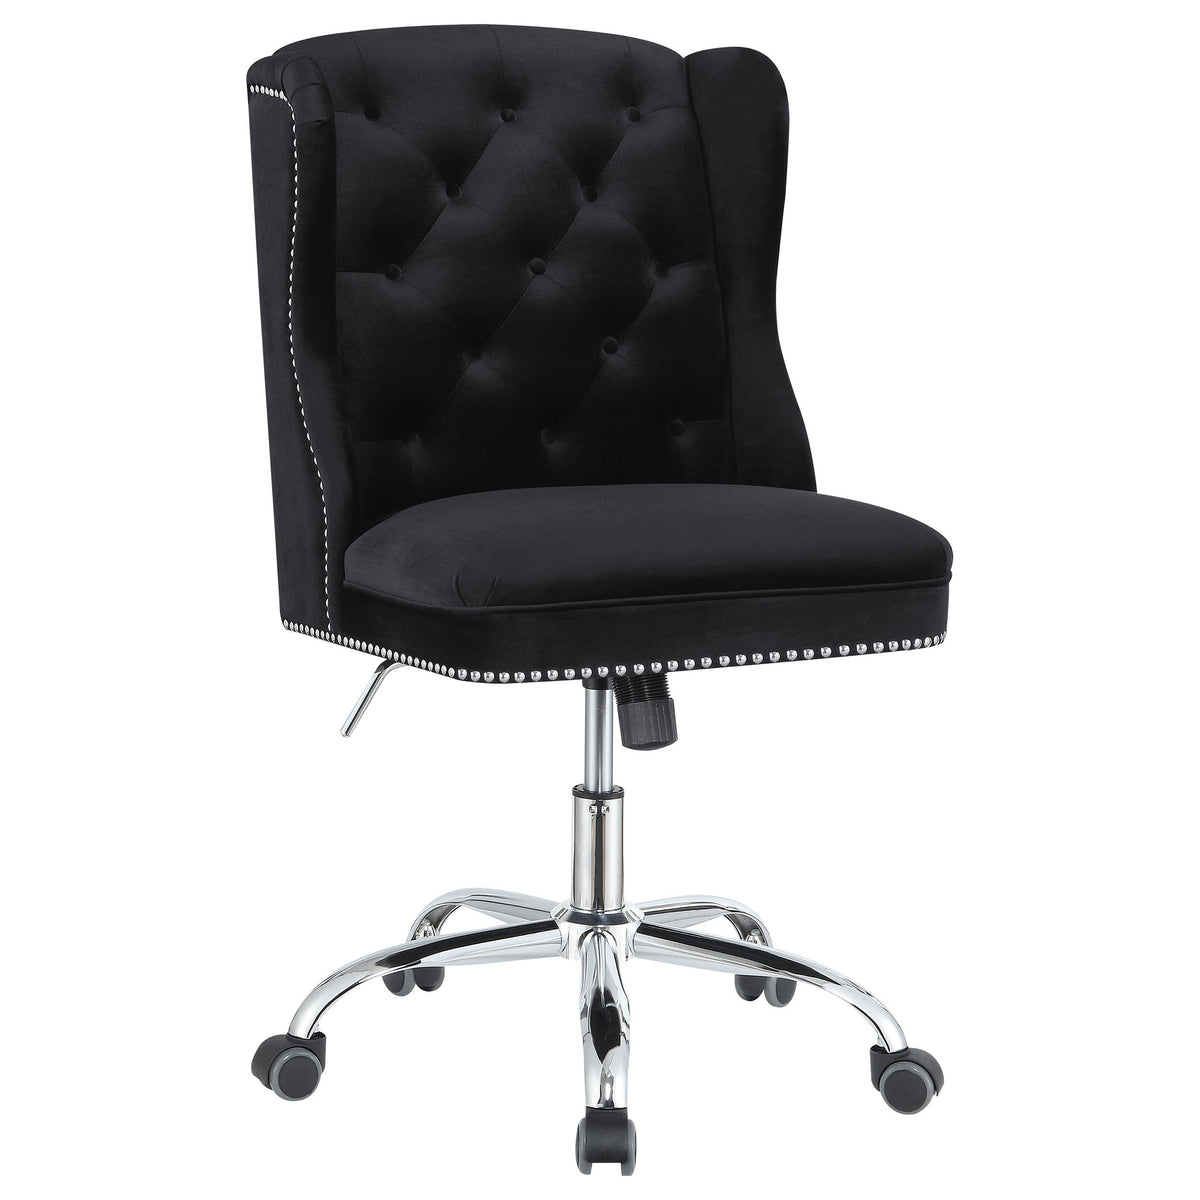 Julius Upholstered Tufted Office Chair Black and Chrome Julius Upholstered Tufted Office Chair Black and Chrome Half Price Furniture